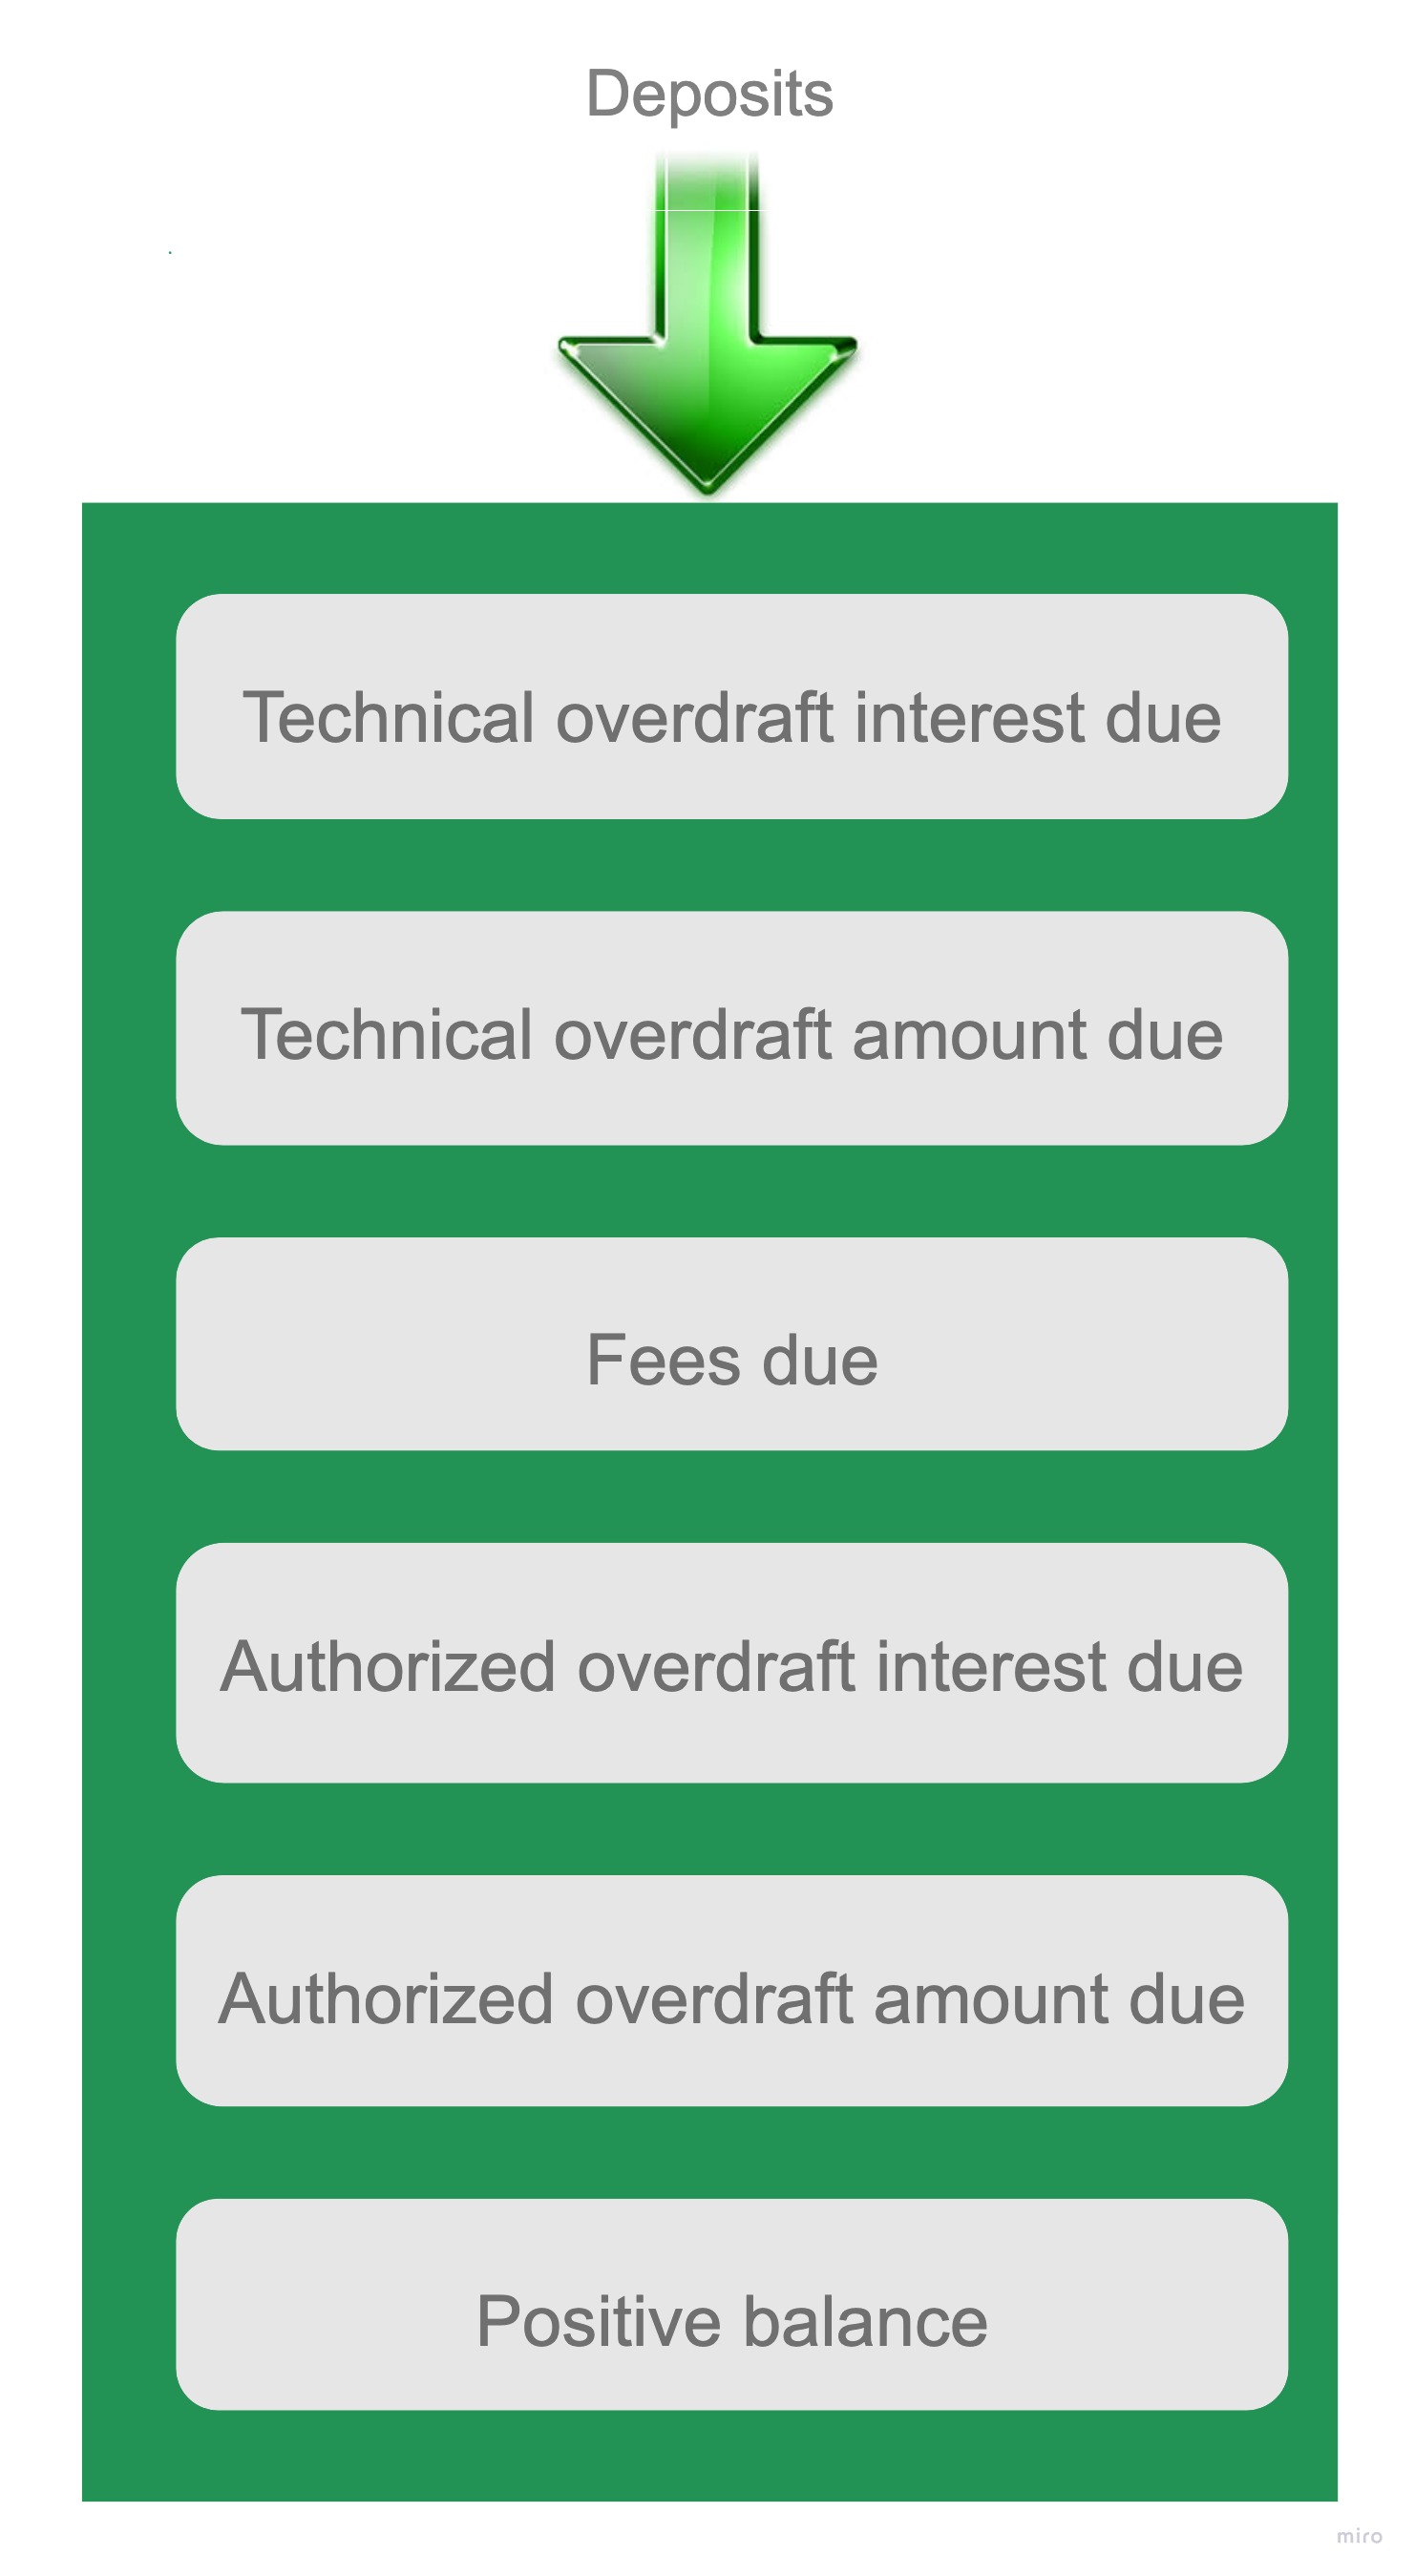 Deposits and technical overdraft